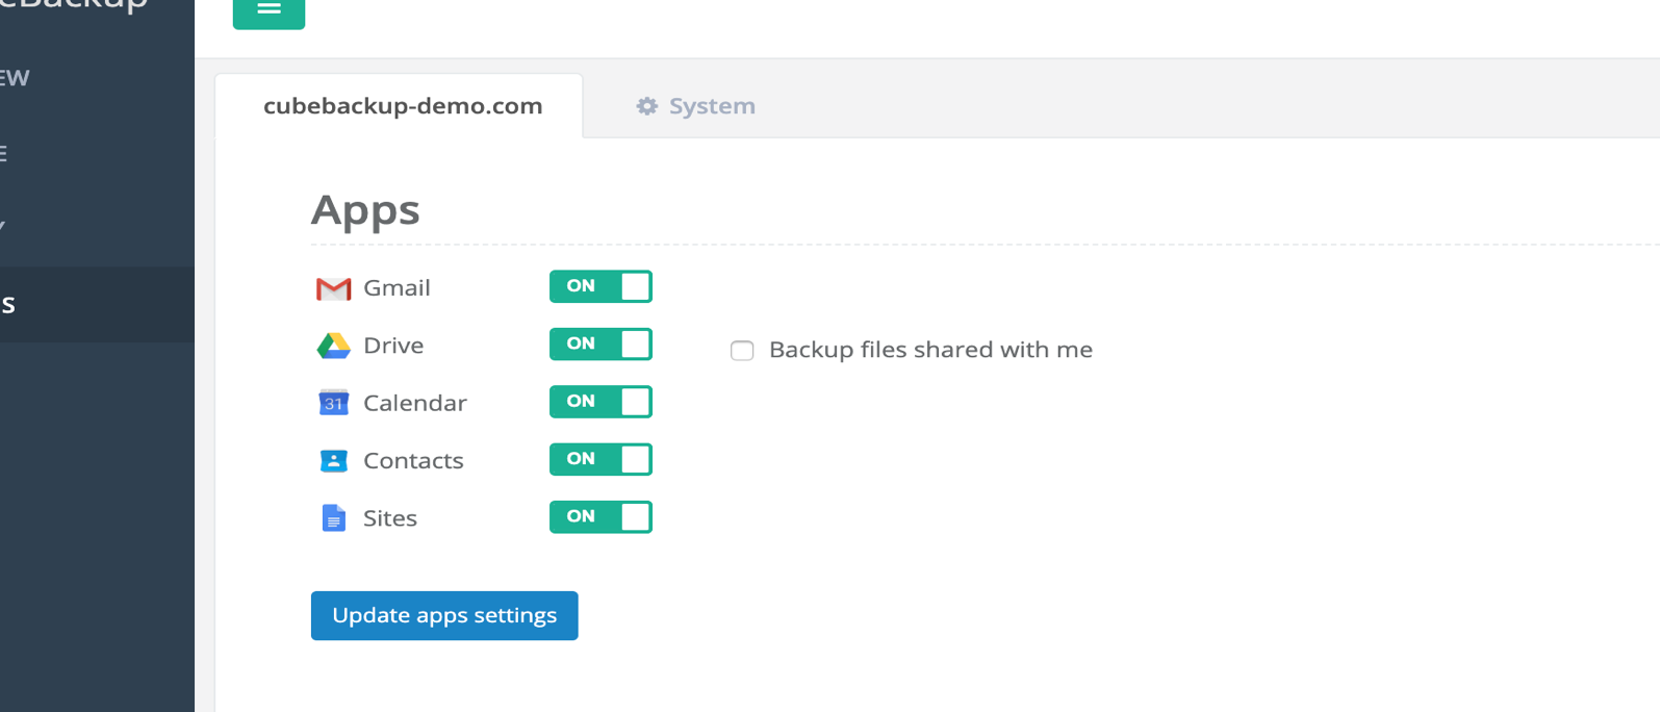 backup shared files with me option